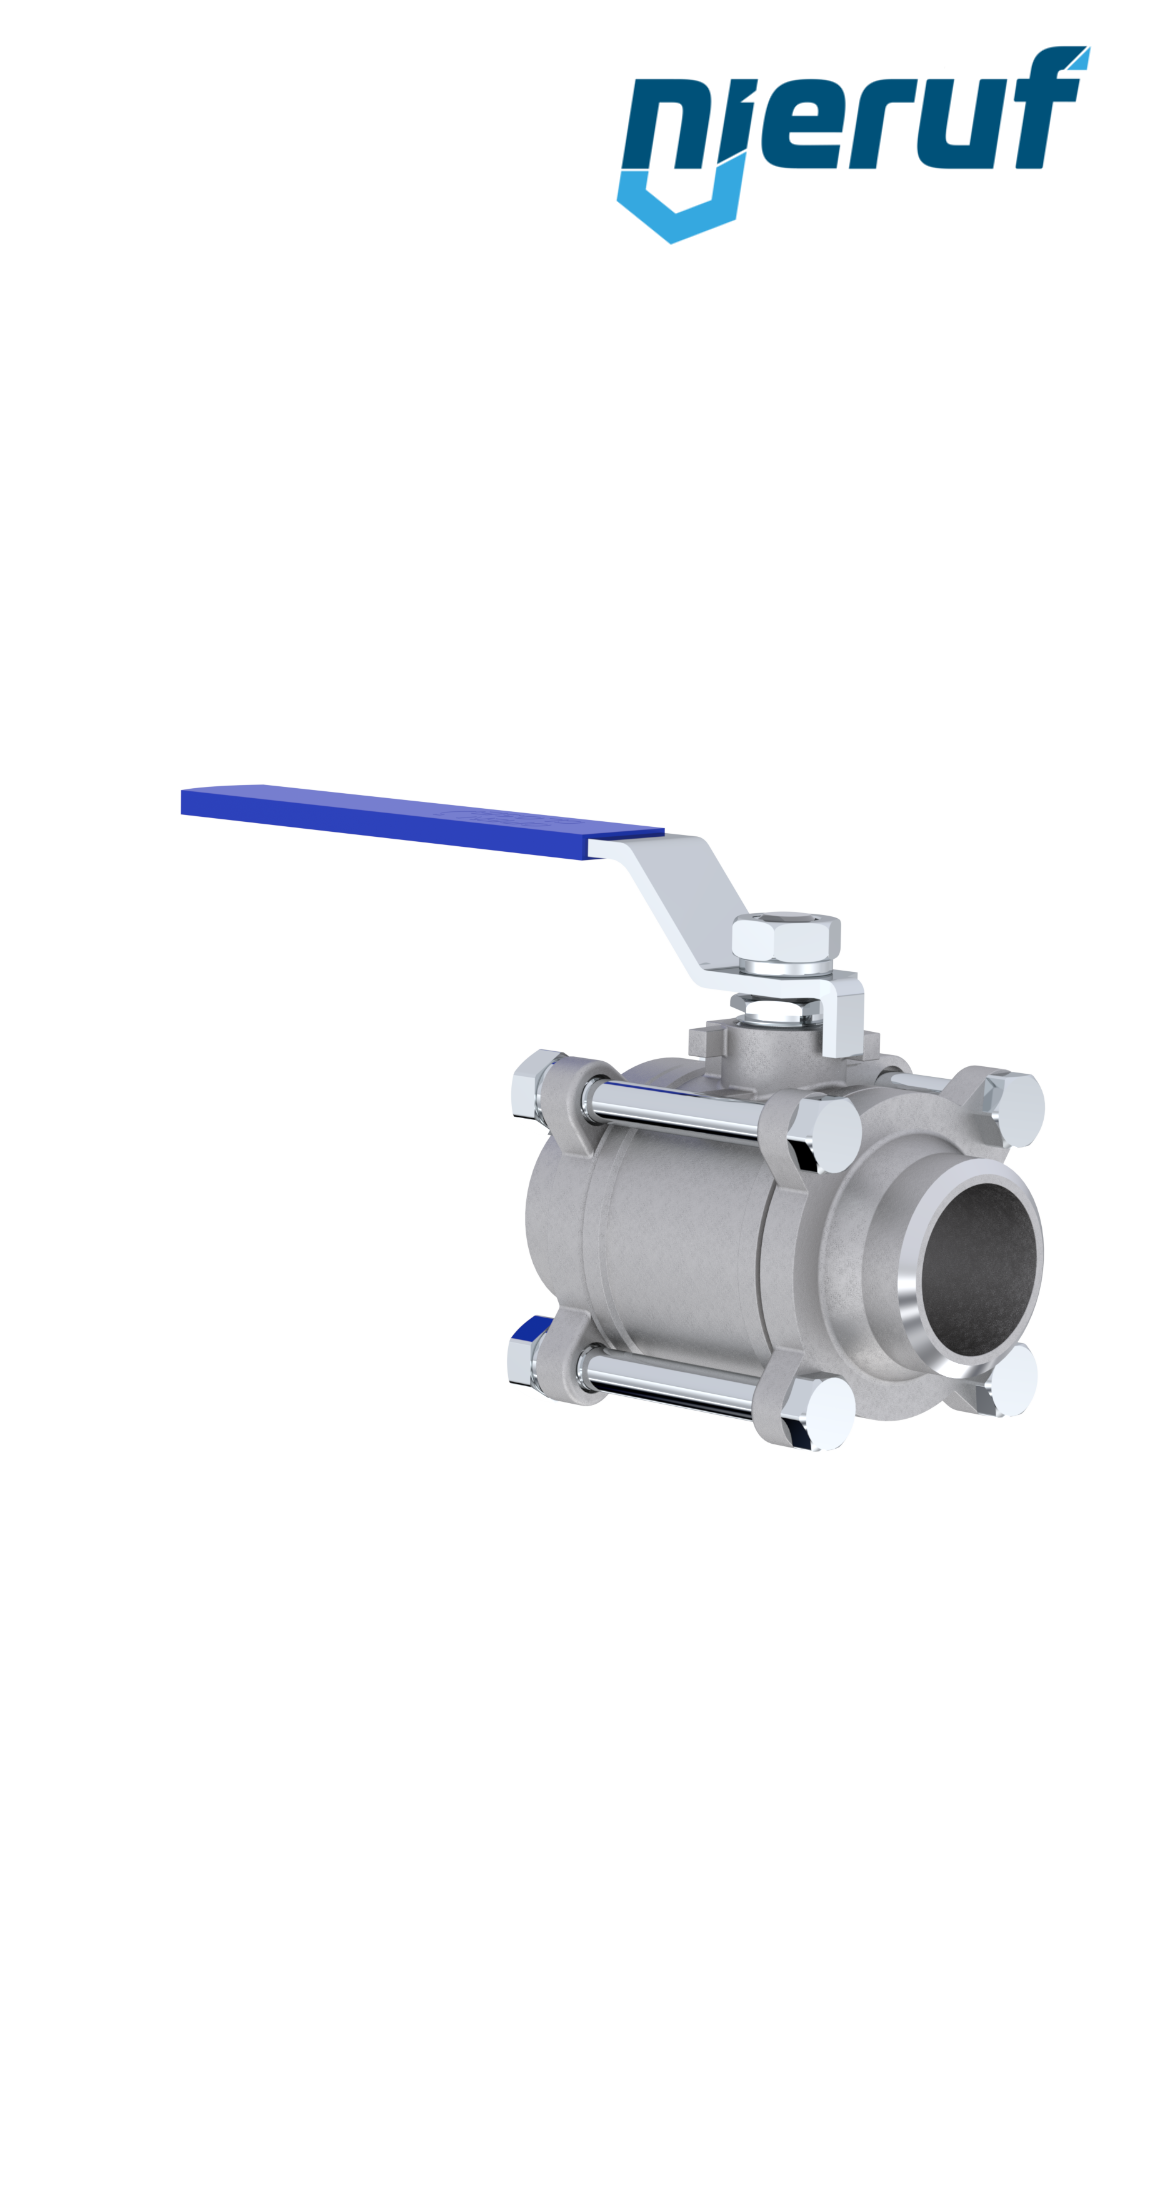 ball valve made of stainless steel DN32 - 1 1/4" inch GK04 with butt weld